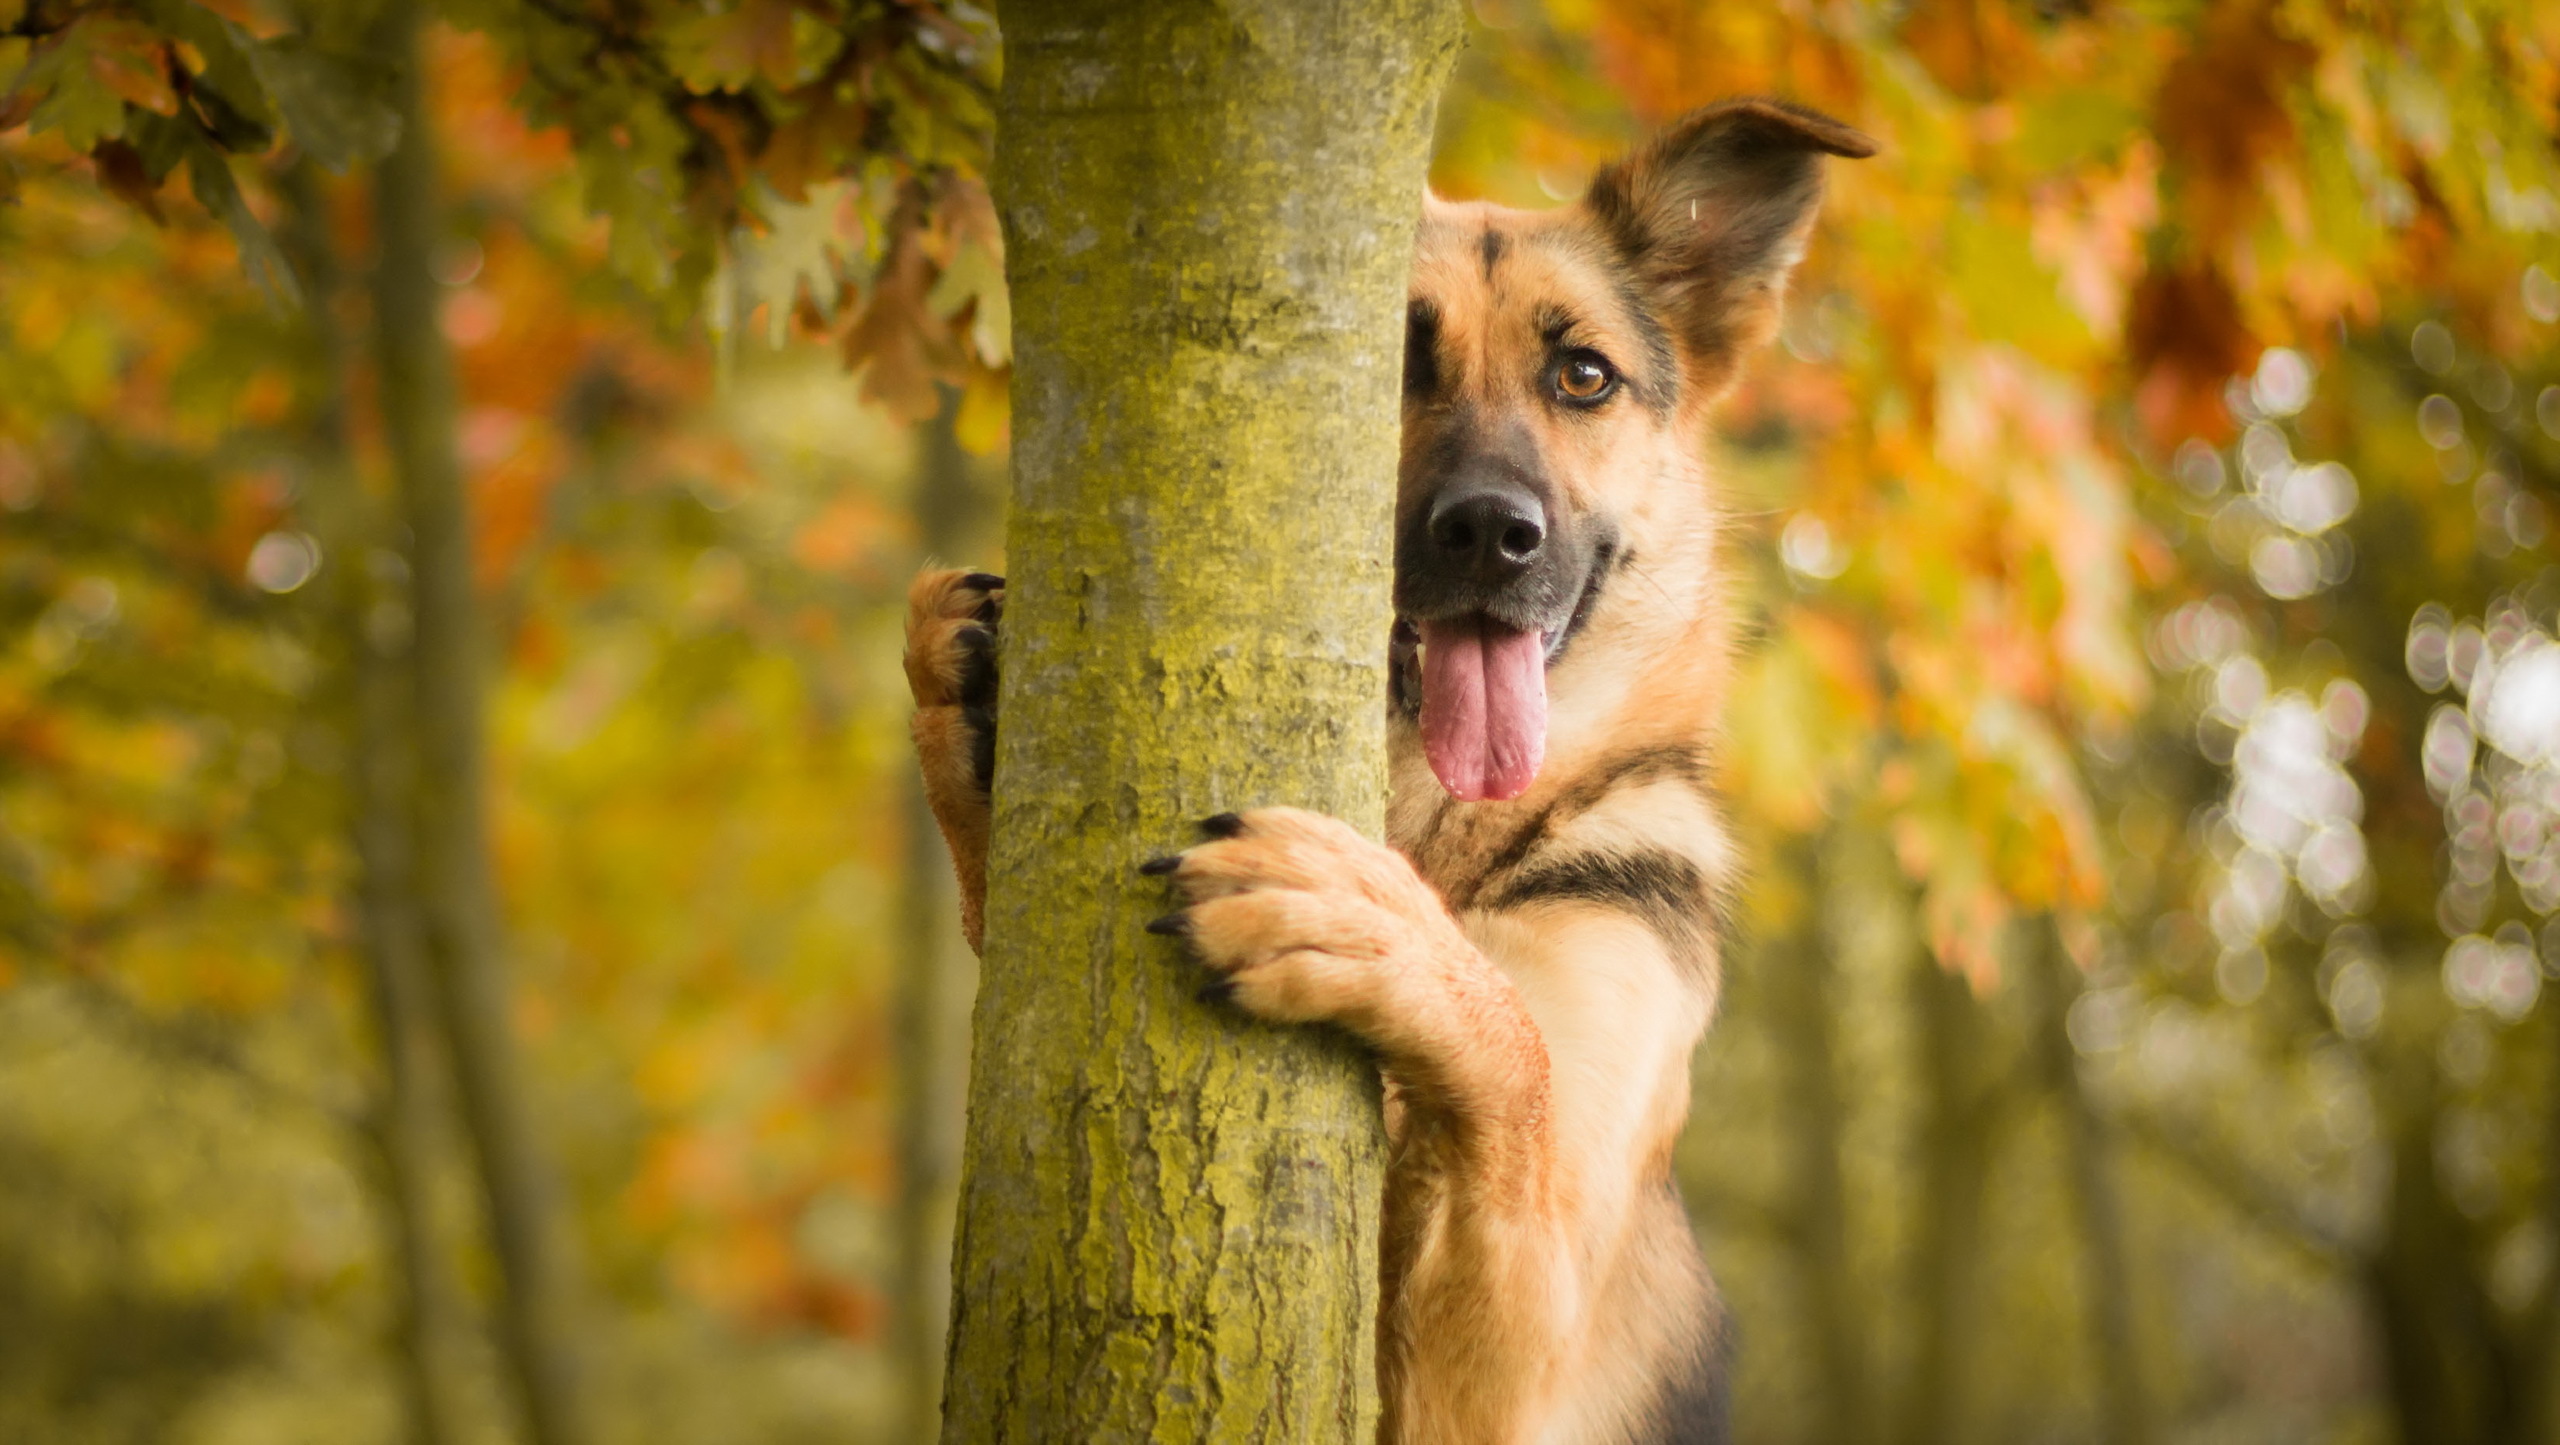 Cool Wallpapers wood, animals, tree, dog, protruding tongue, tongue stuck out